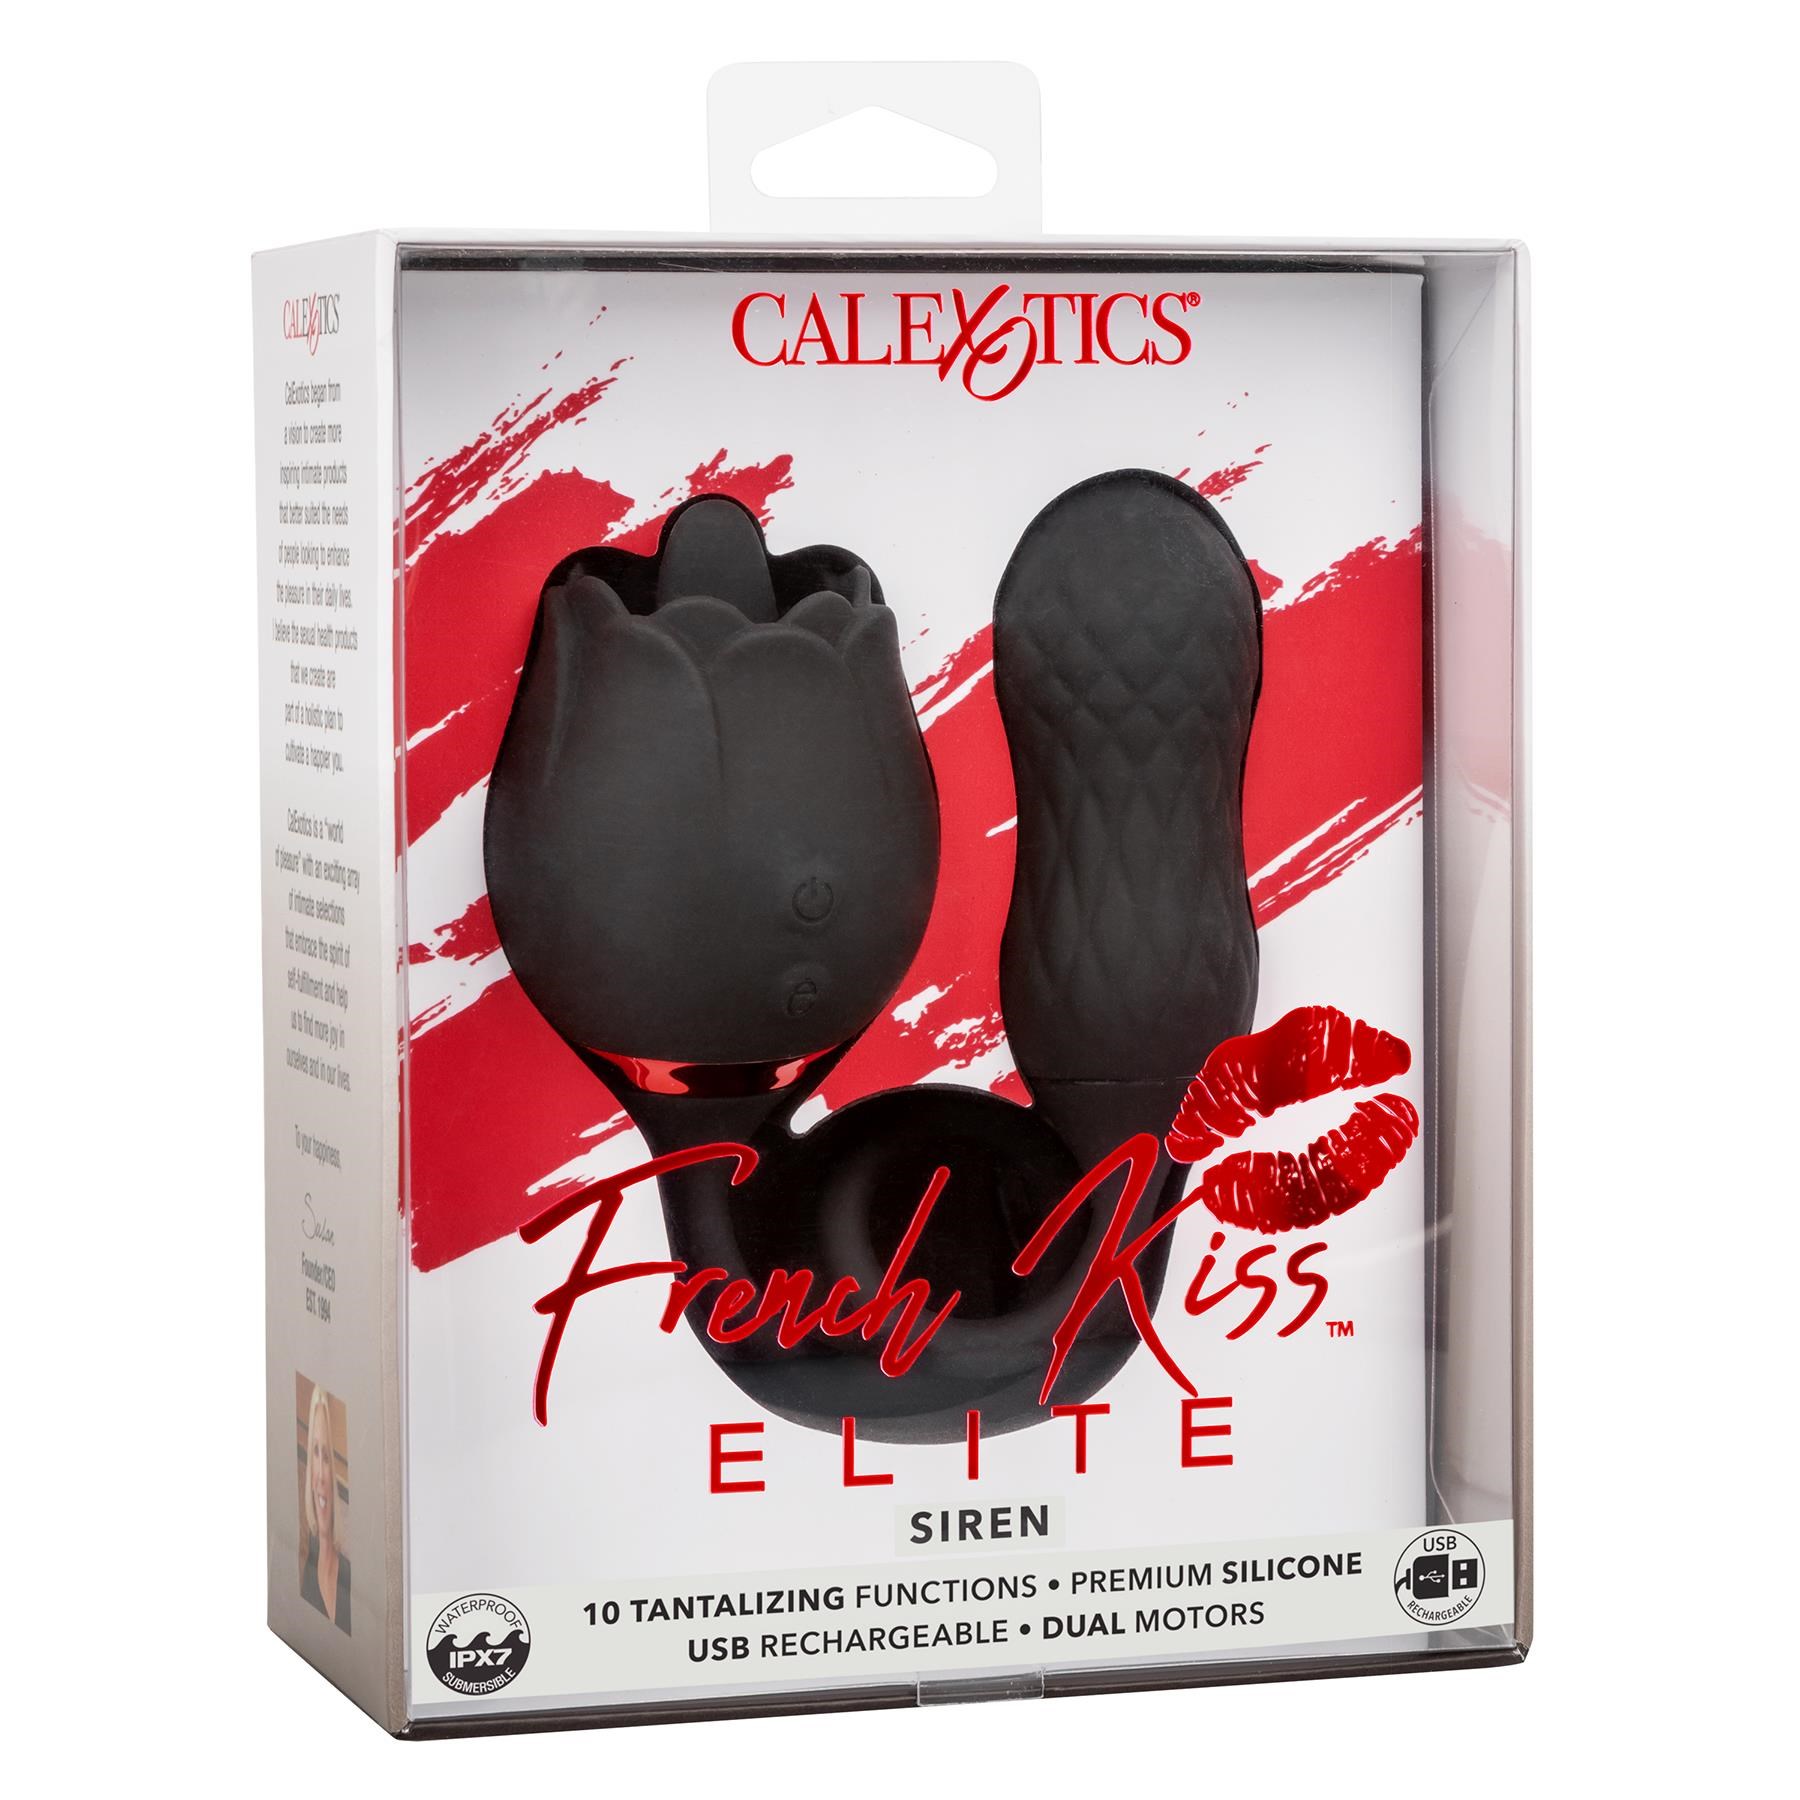 French Kiss Elite Siren Clitorial and Anal Stimulator - Packaging